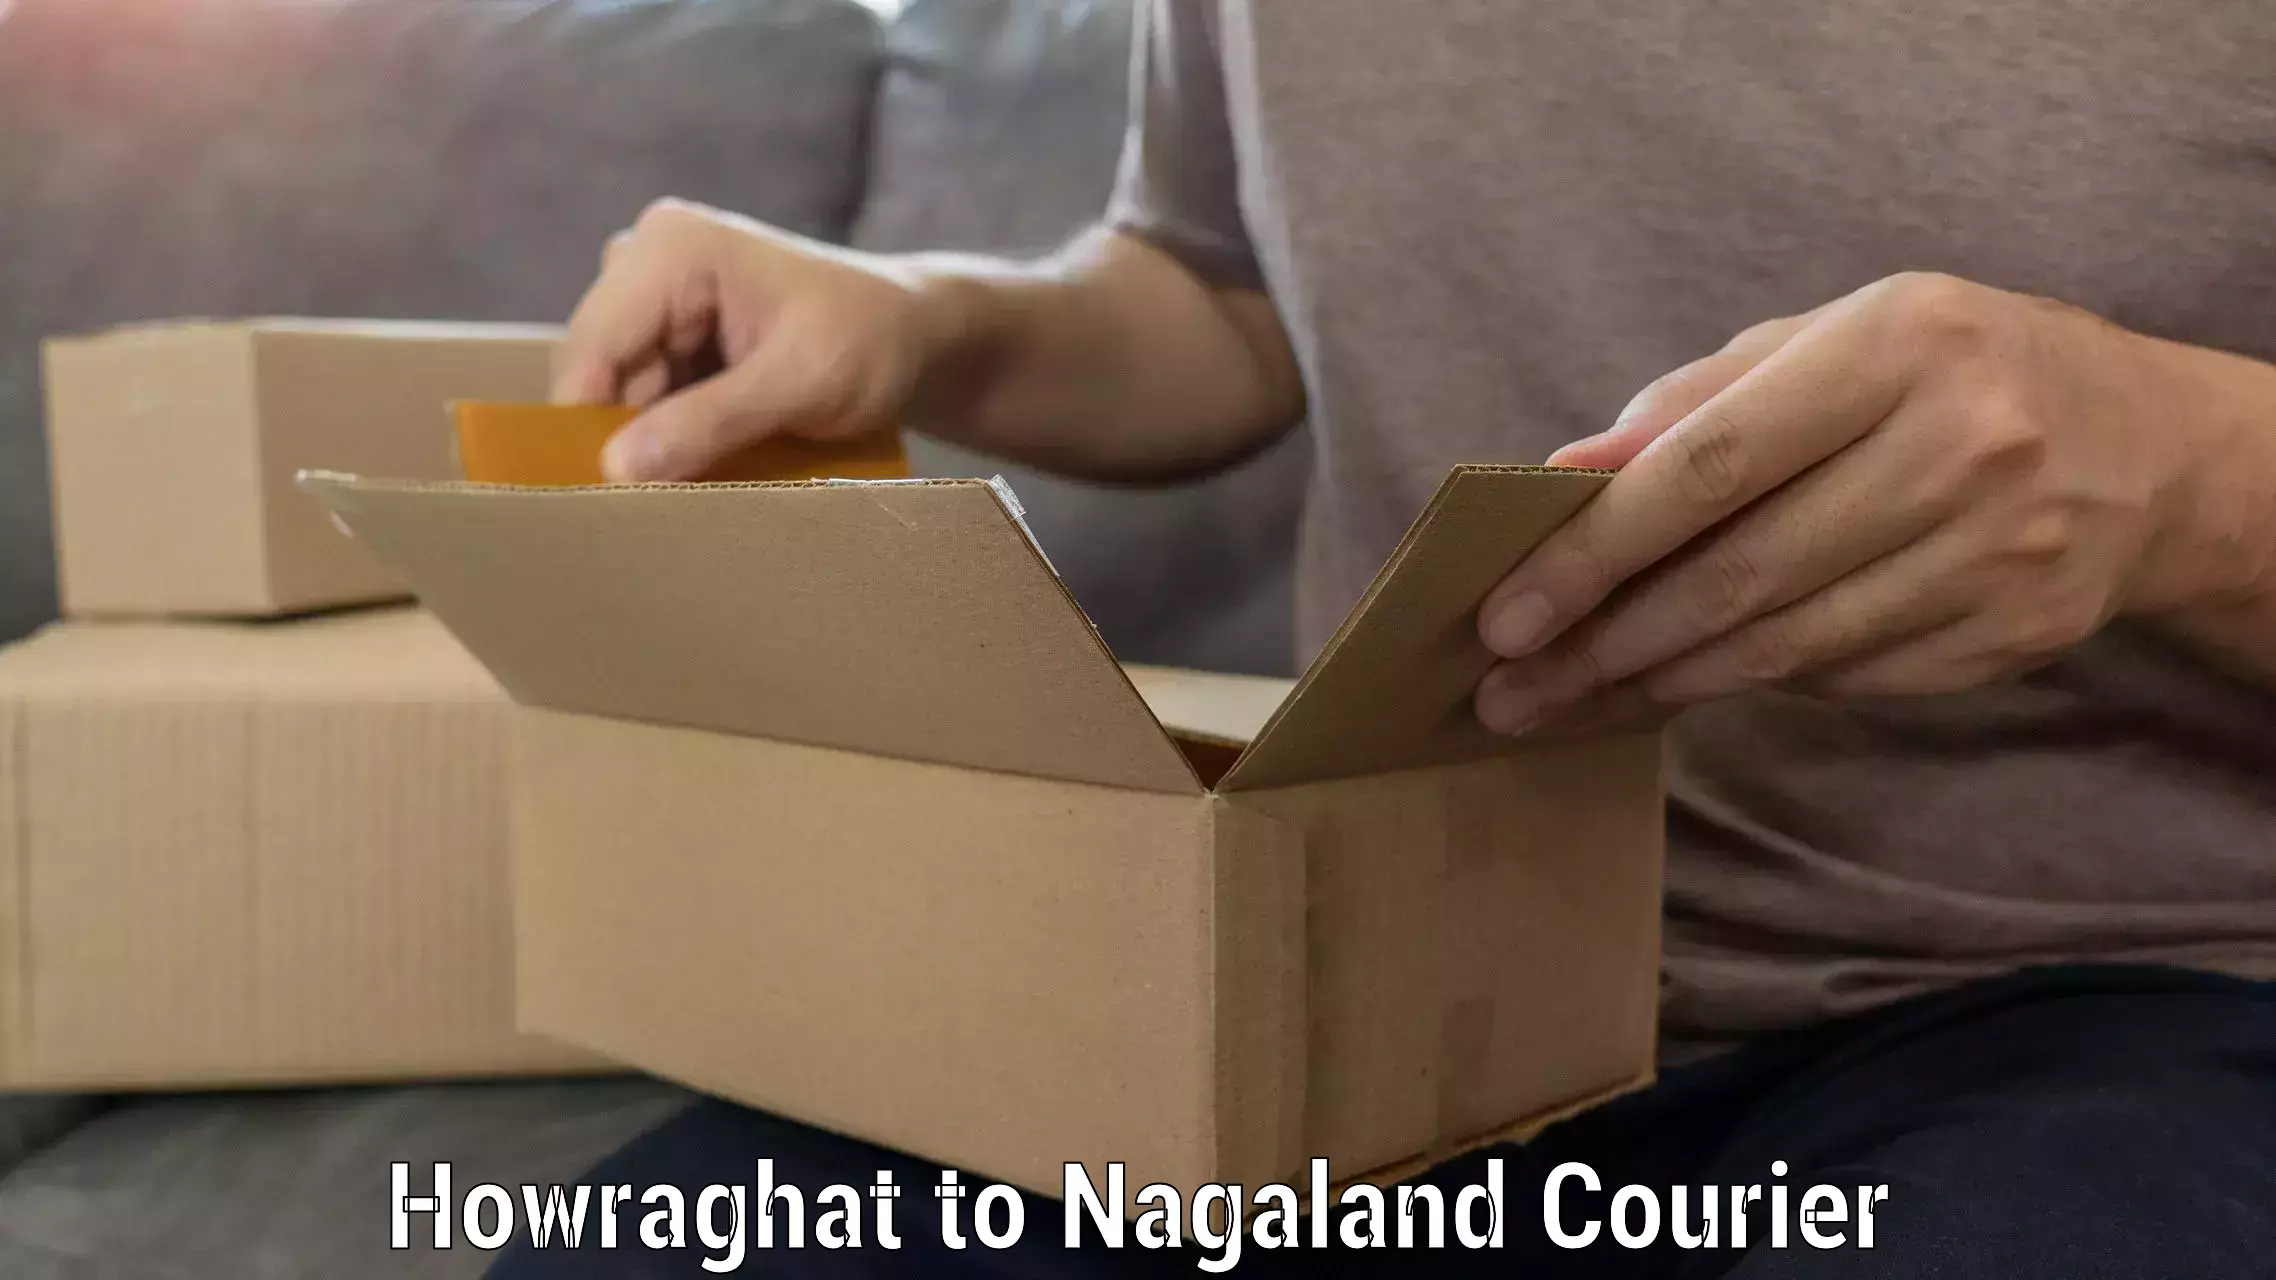 Efficient household moving Howraghat to Nagaland